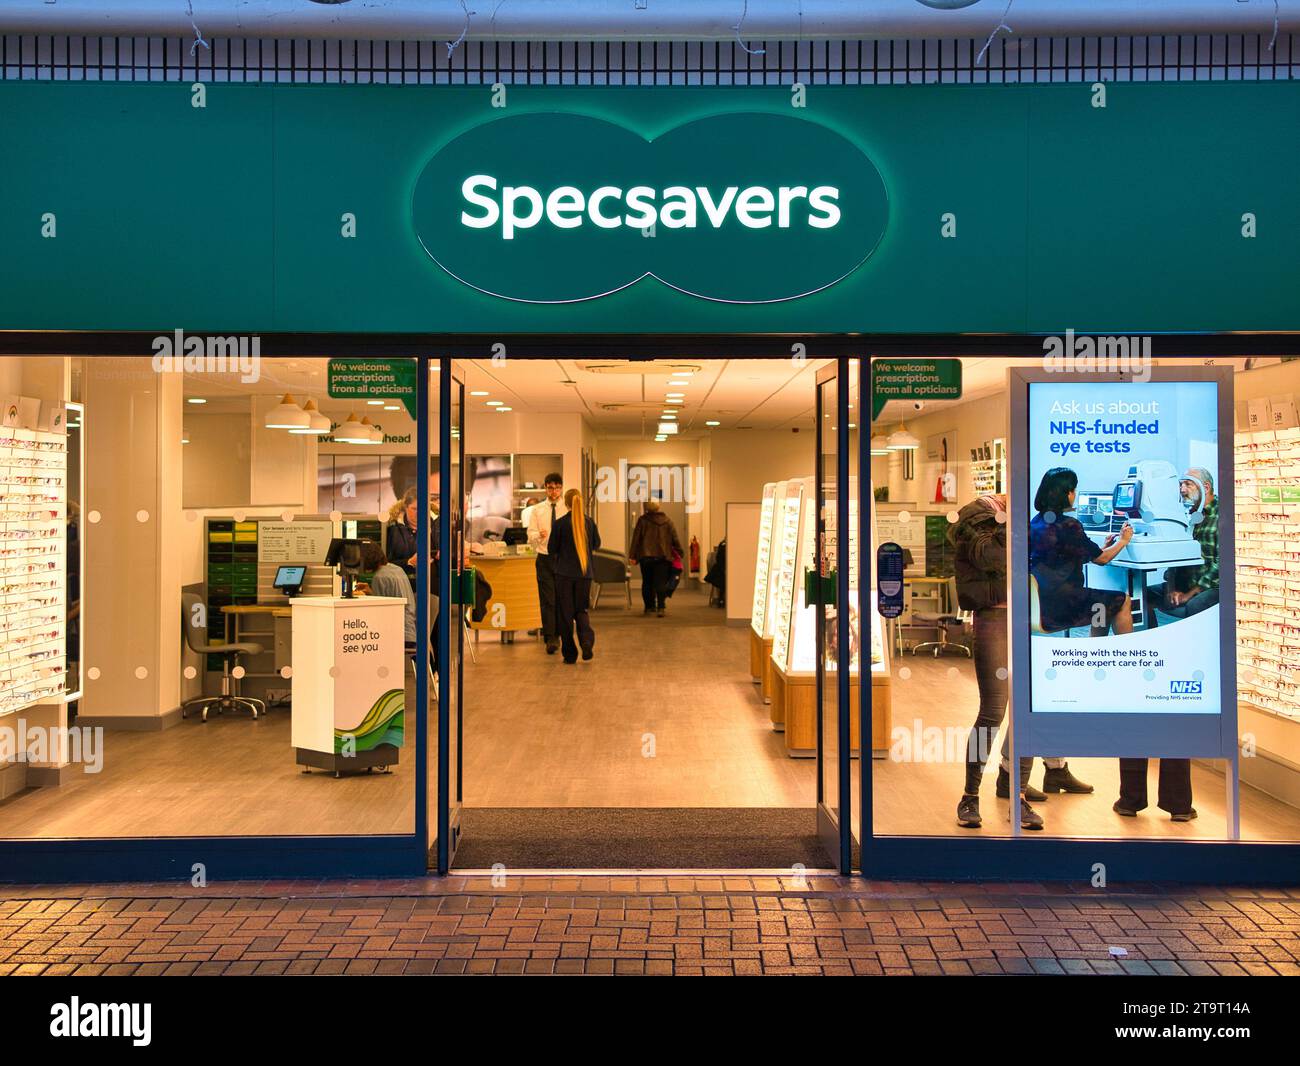 The frontage of a branch of optical retail chain Specsavers. The company sells glasses, sunglasses, contact lenses and also hearing aids. Stock Photo